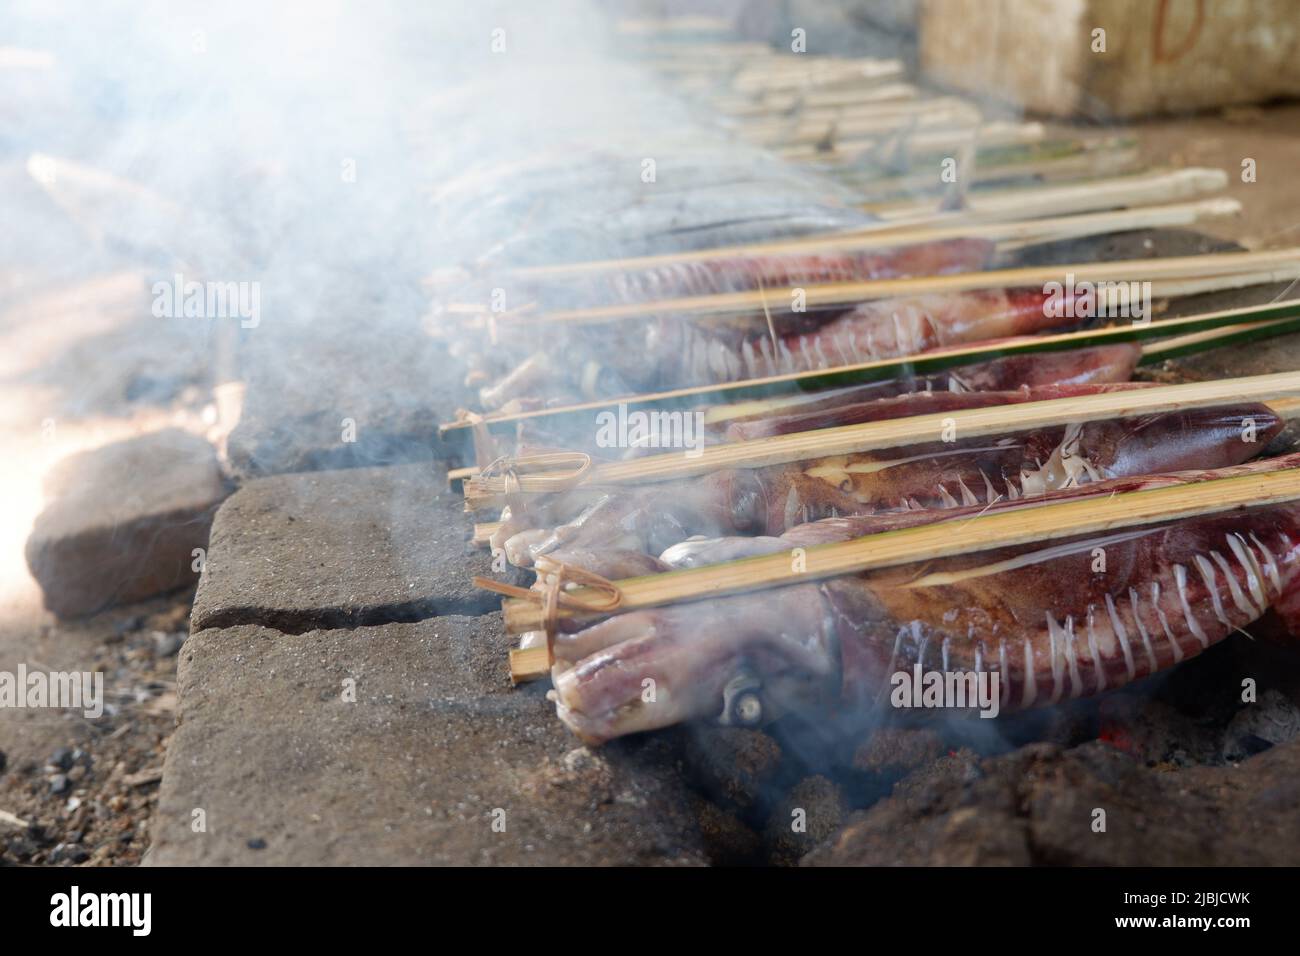 smoked squid is a delicacy. Smoking is a traditional way of preserving food. Stock Photo